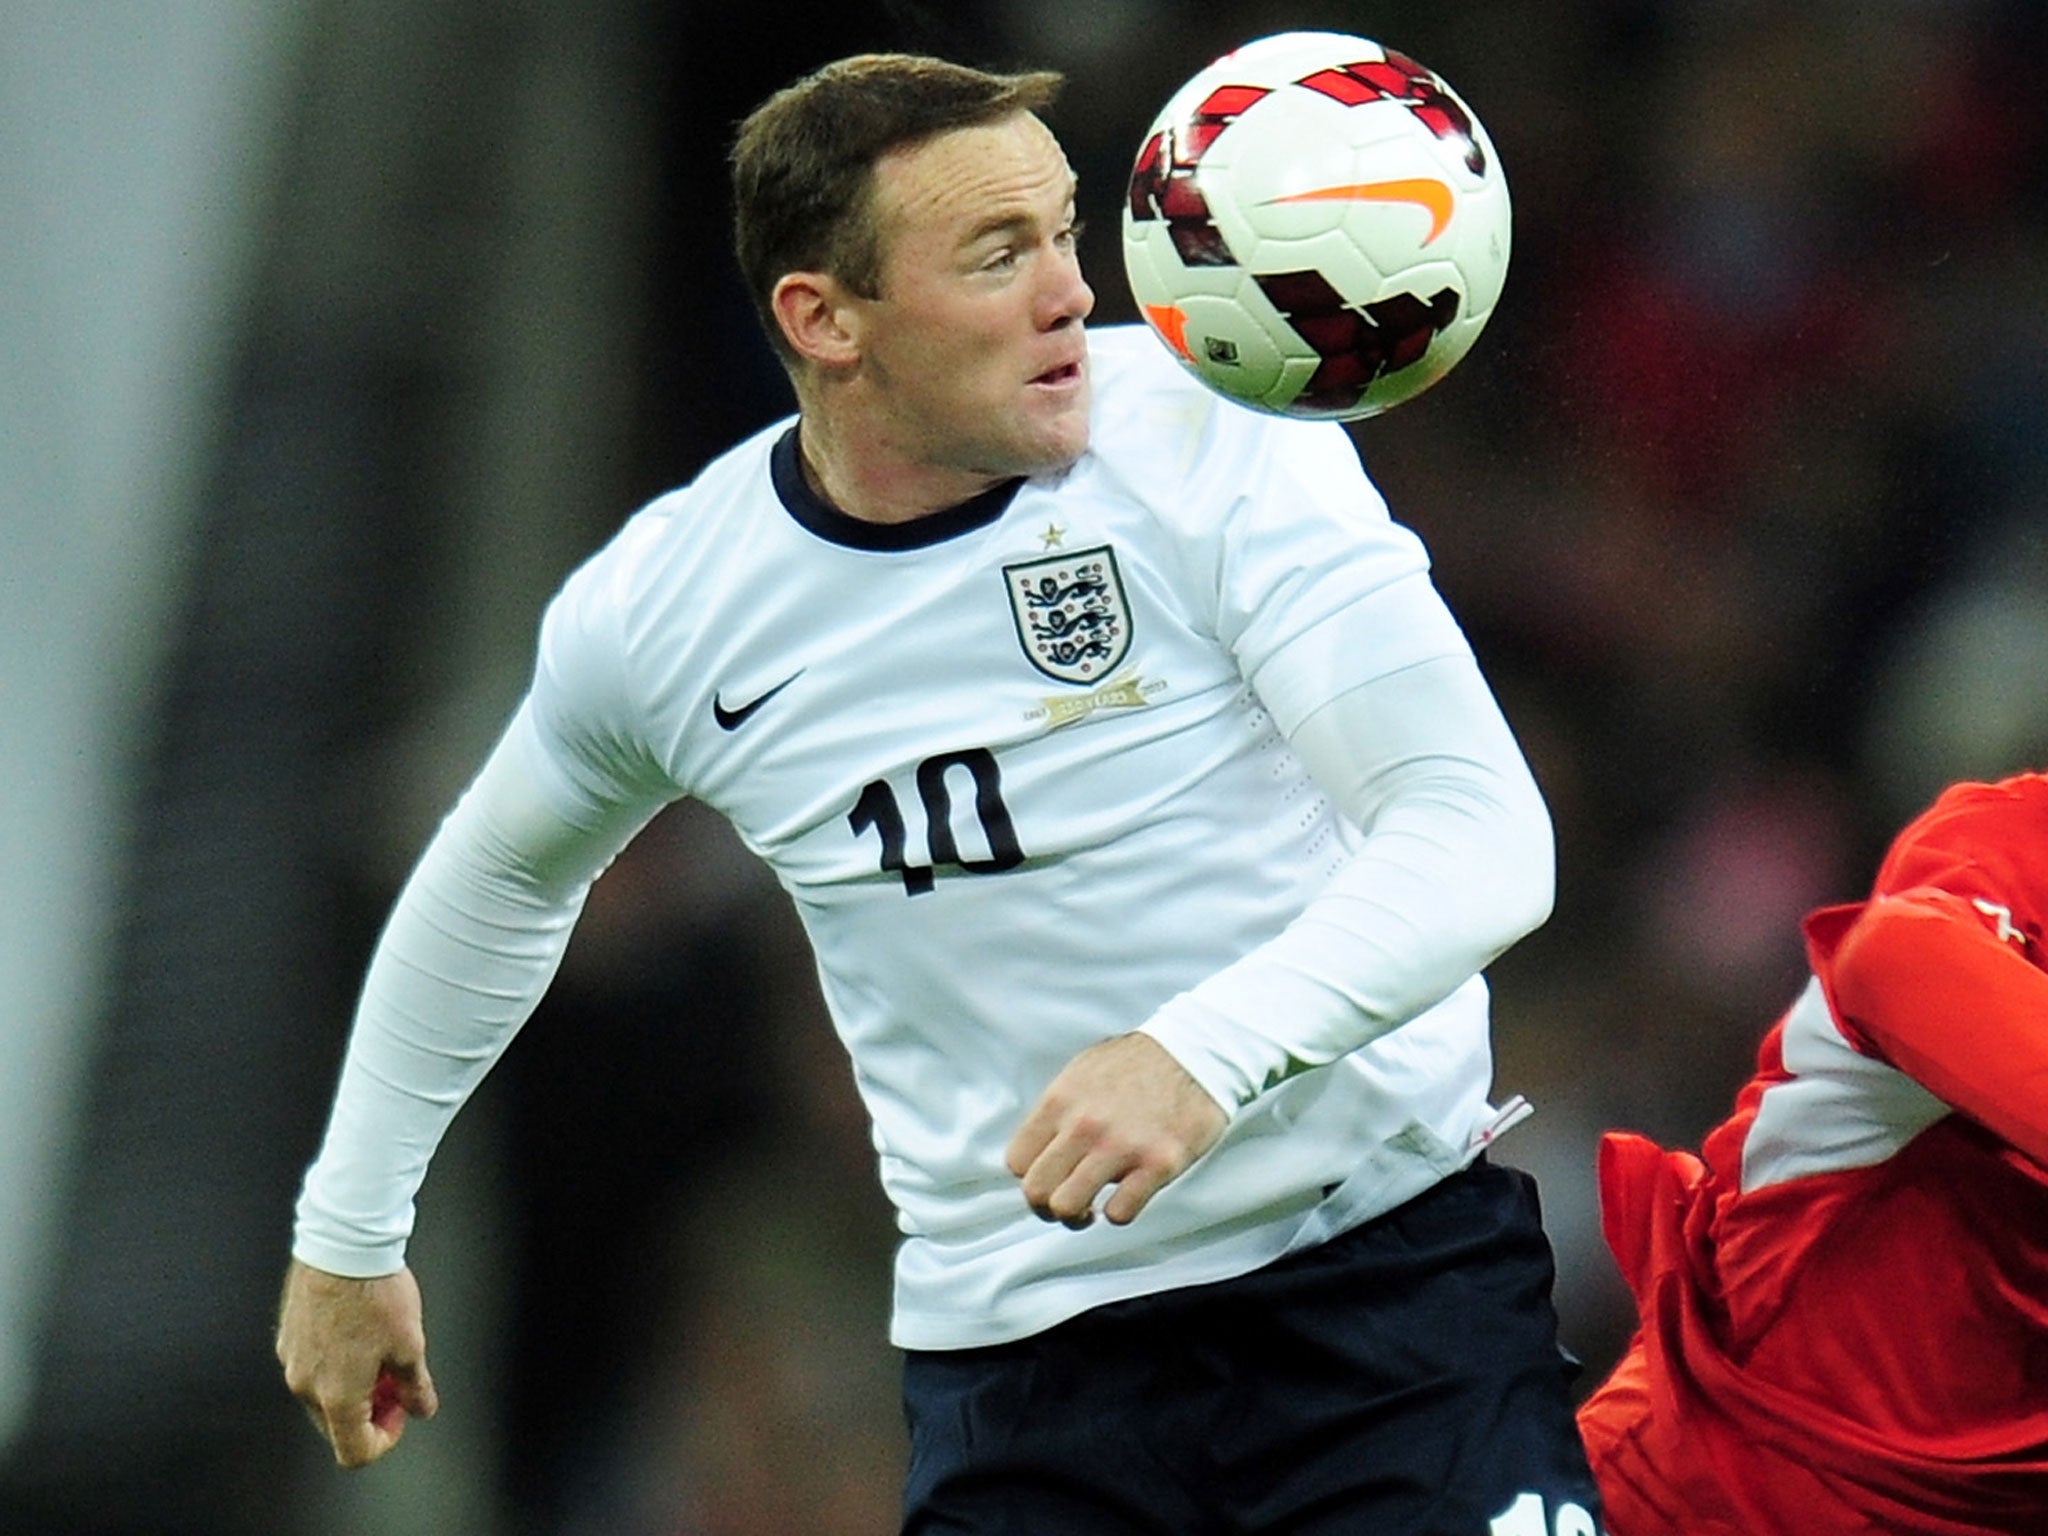 Wayne Rooney wins the ball against Chile on Friday night